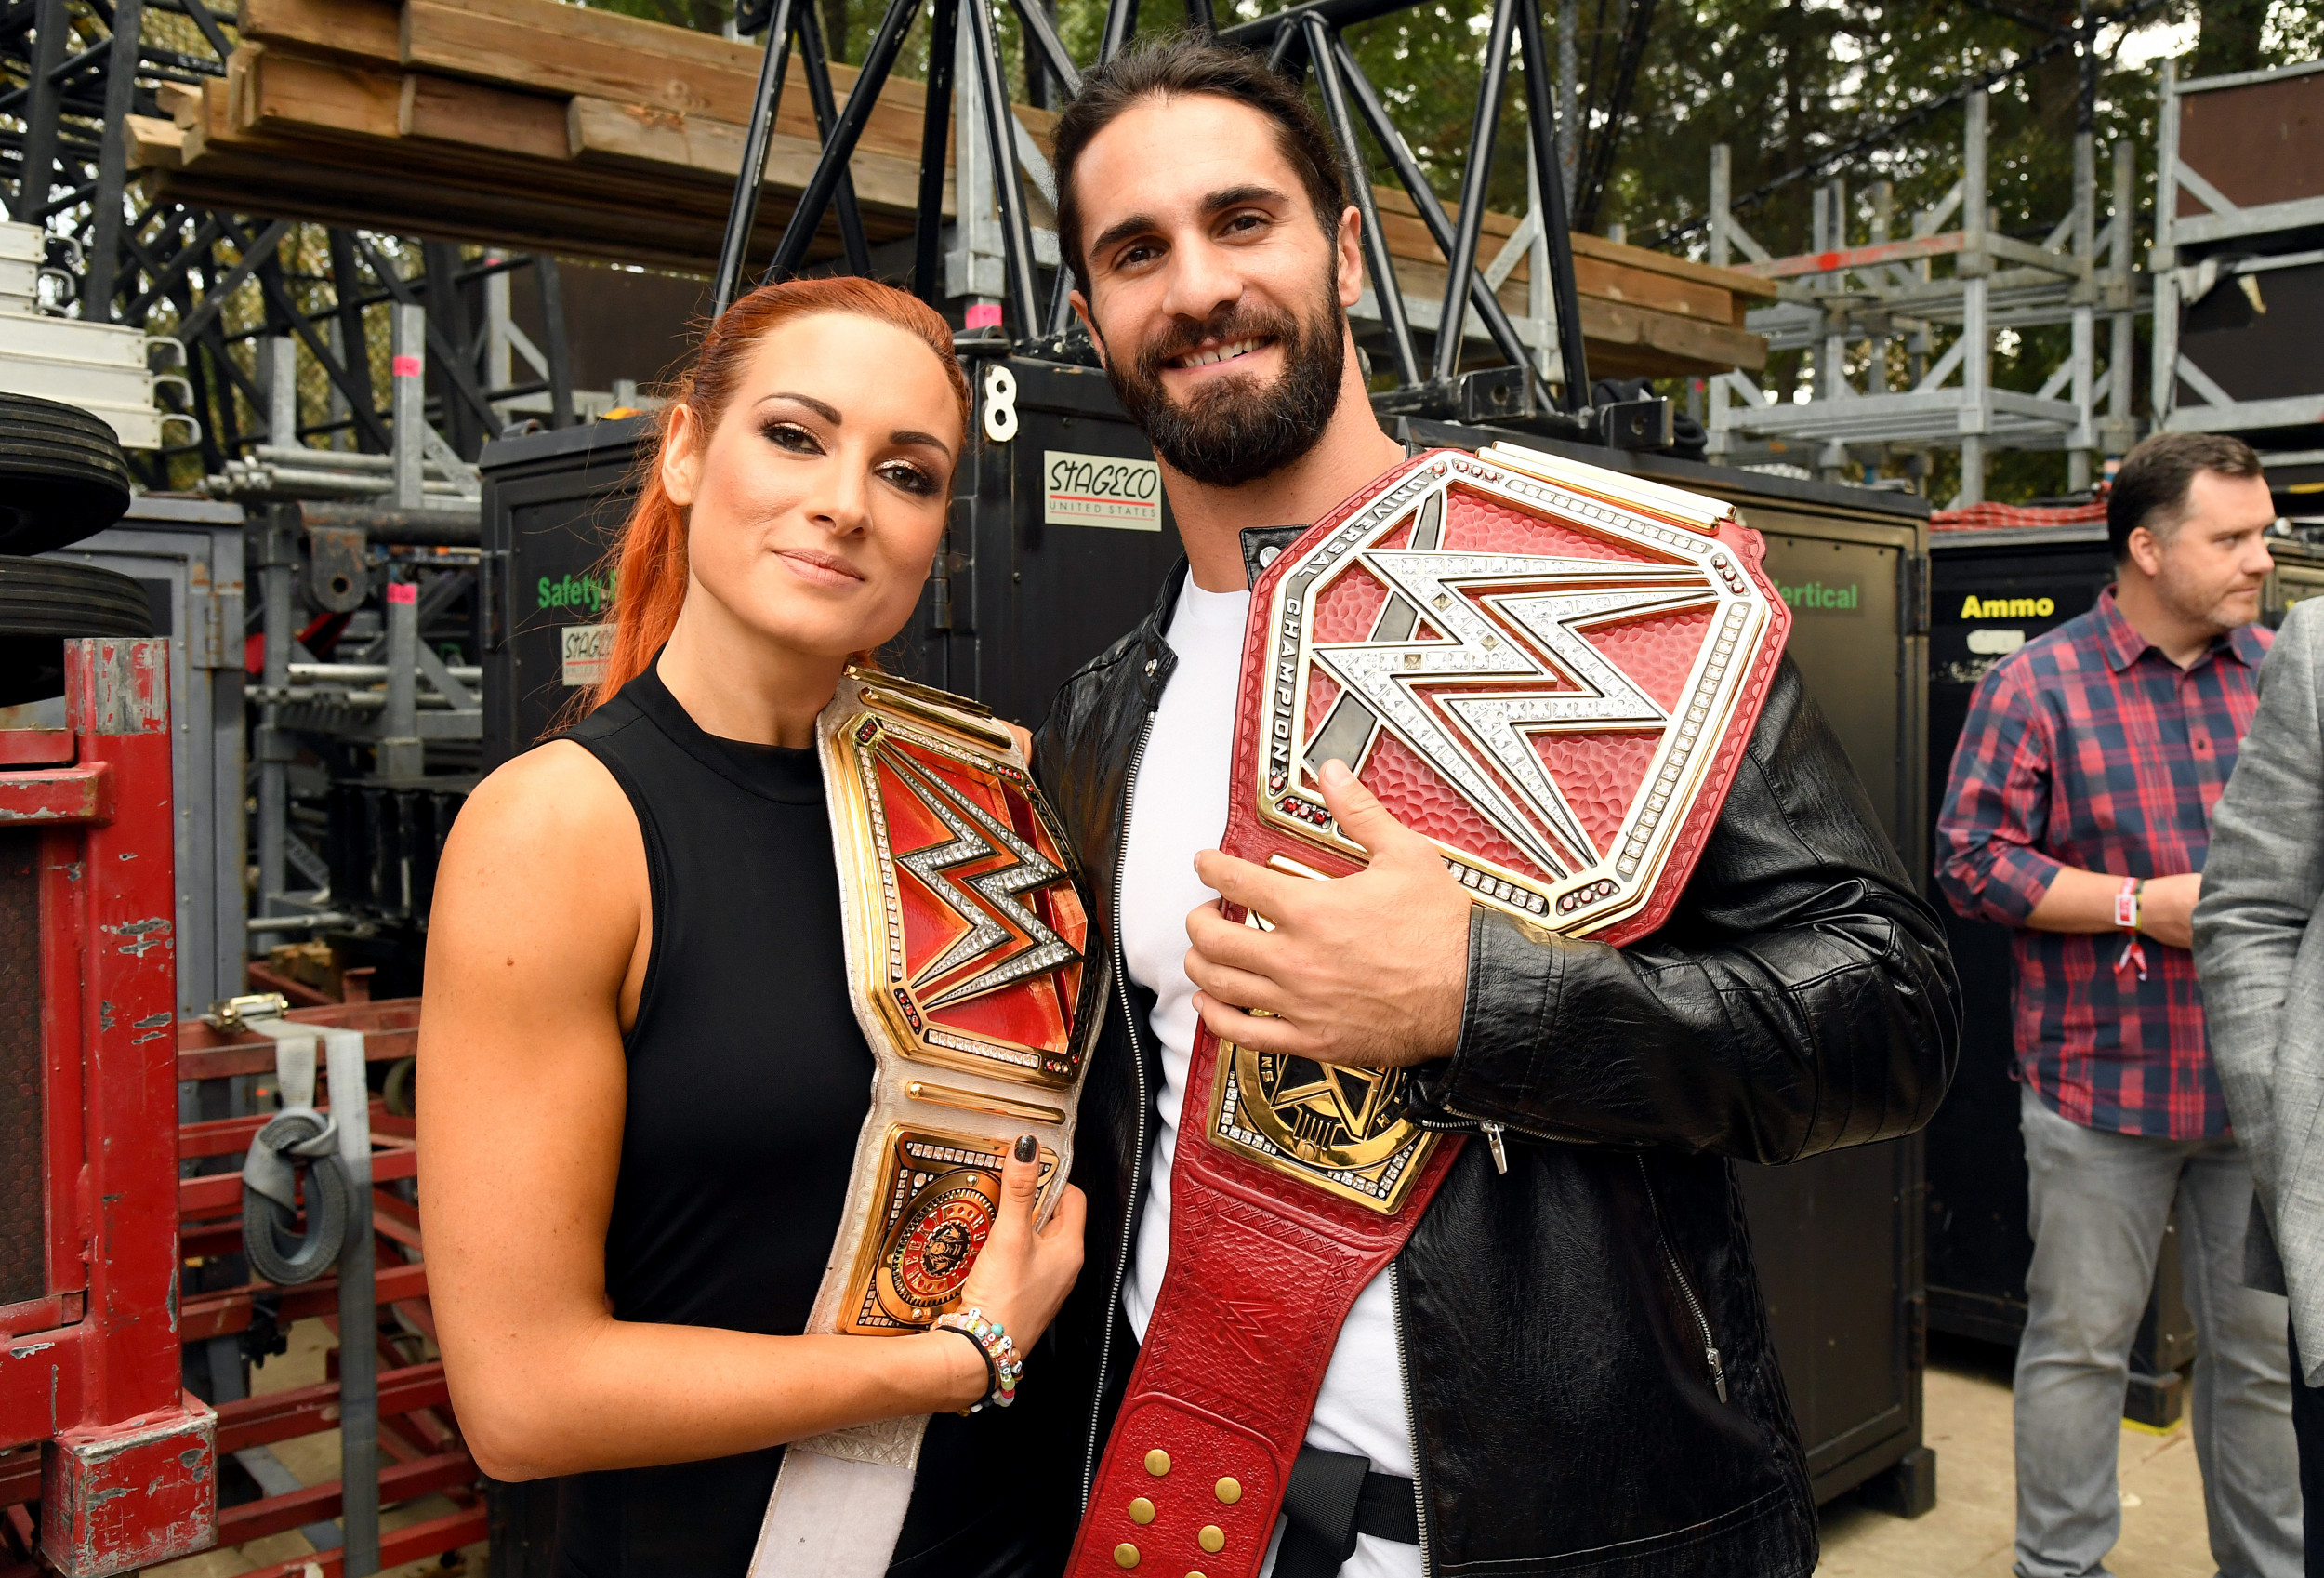 seth rollins and becky